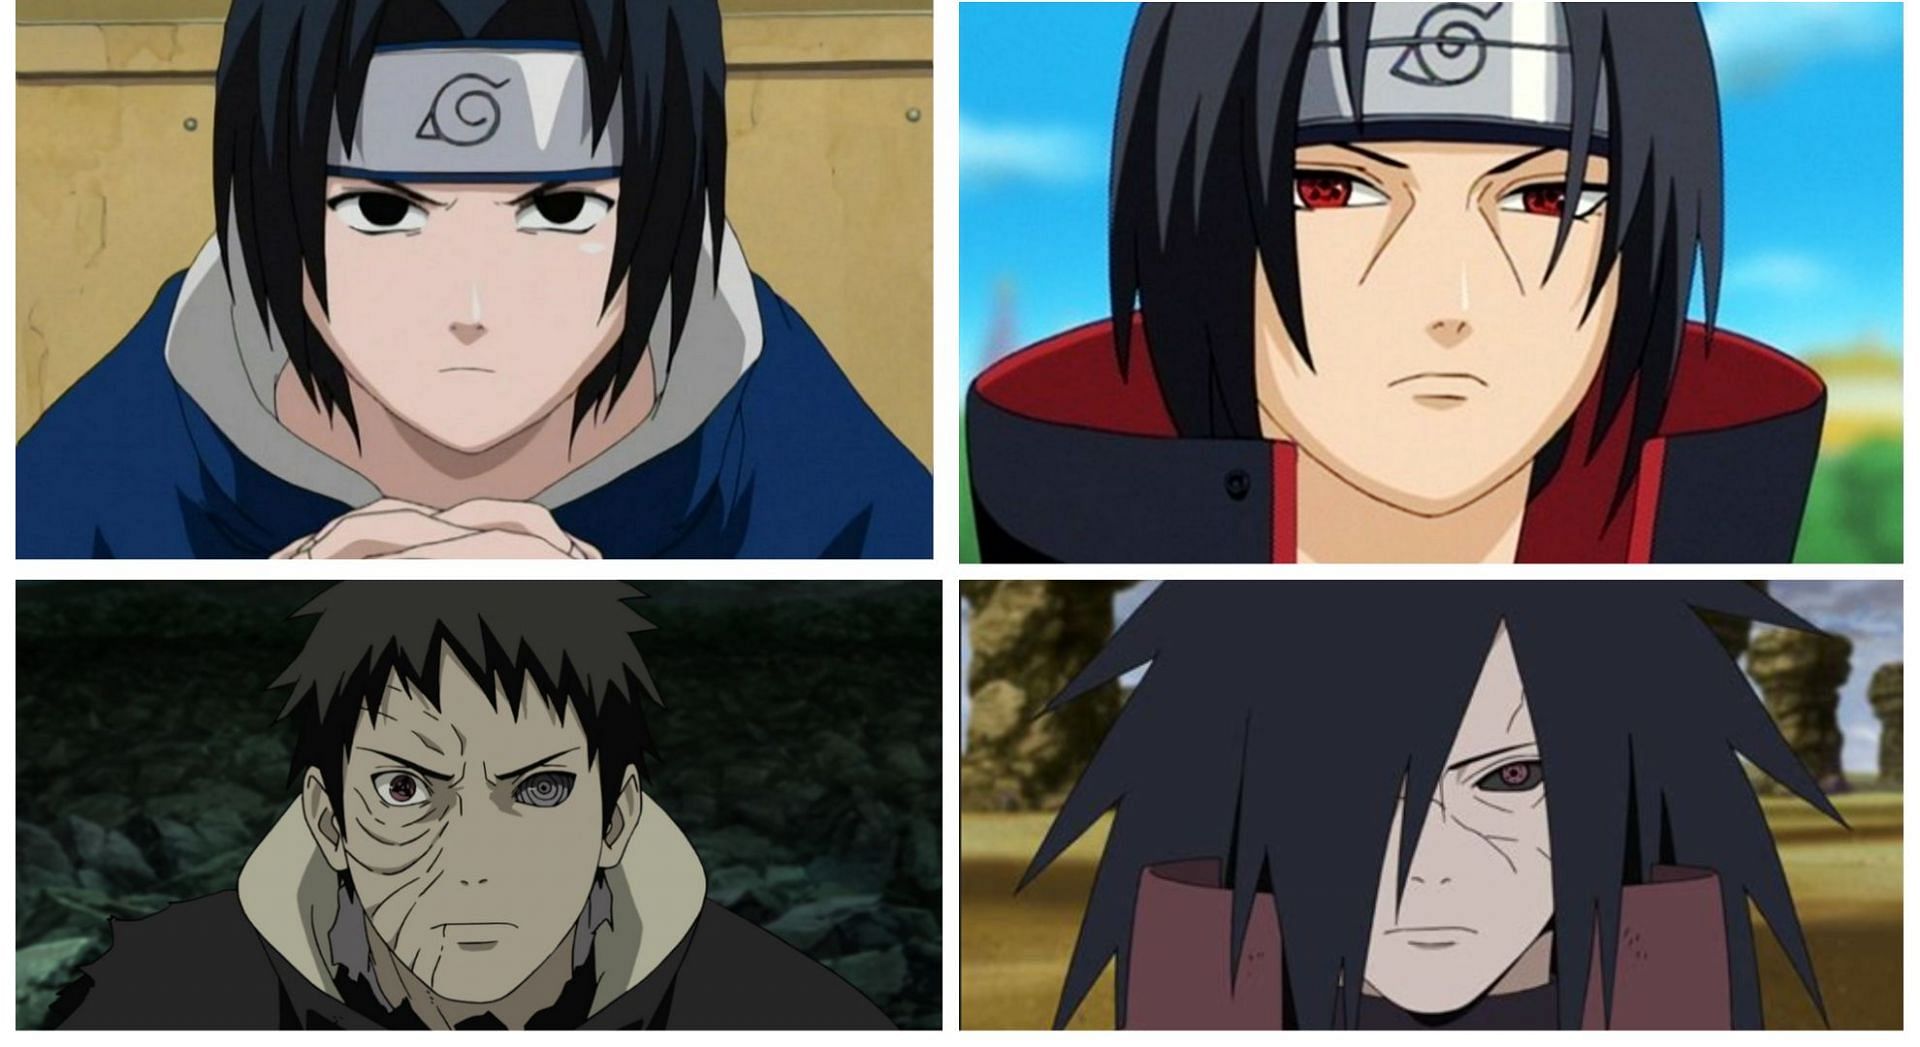 What is Itachi from Naruto MBTI personality type? - Quora